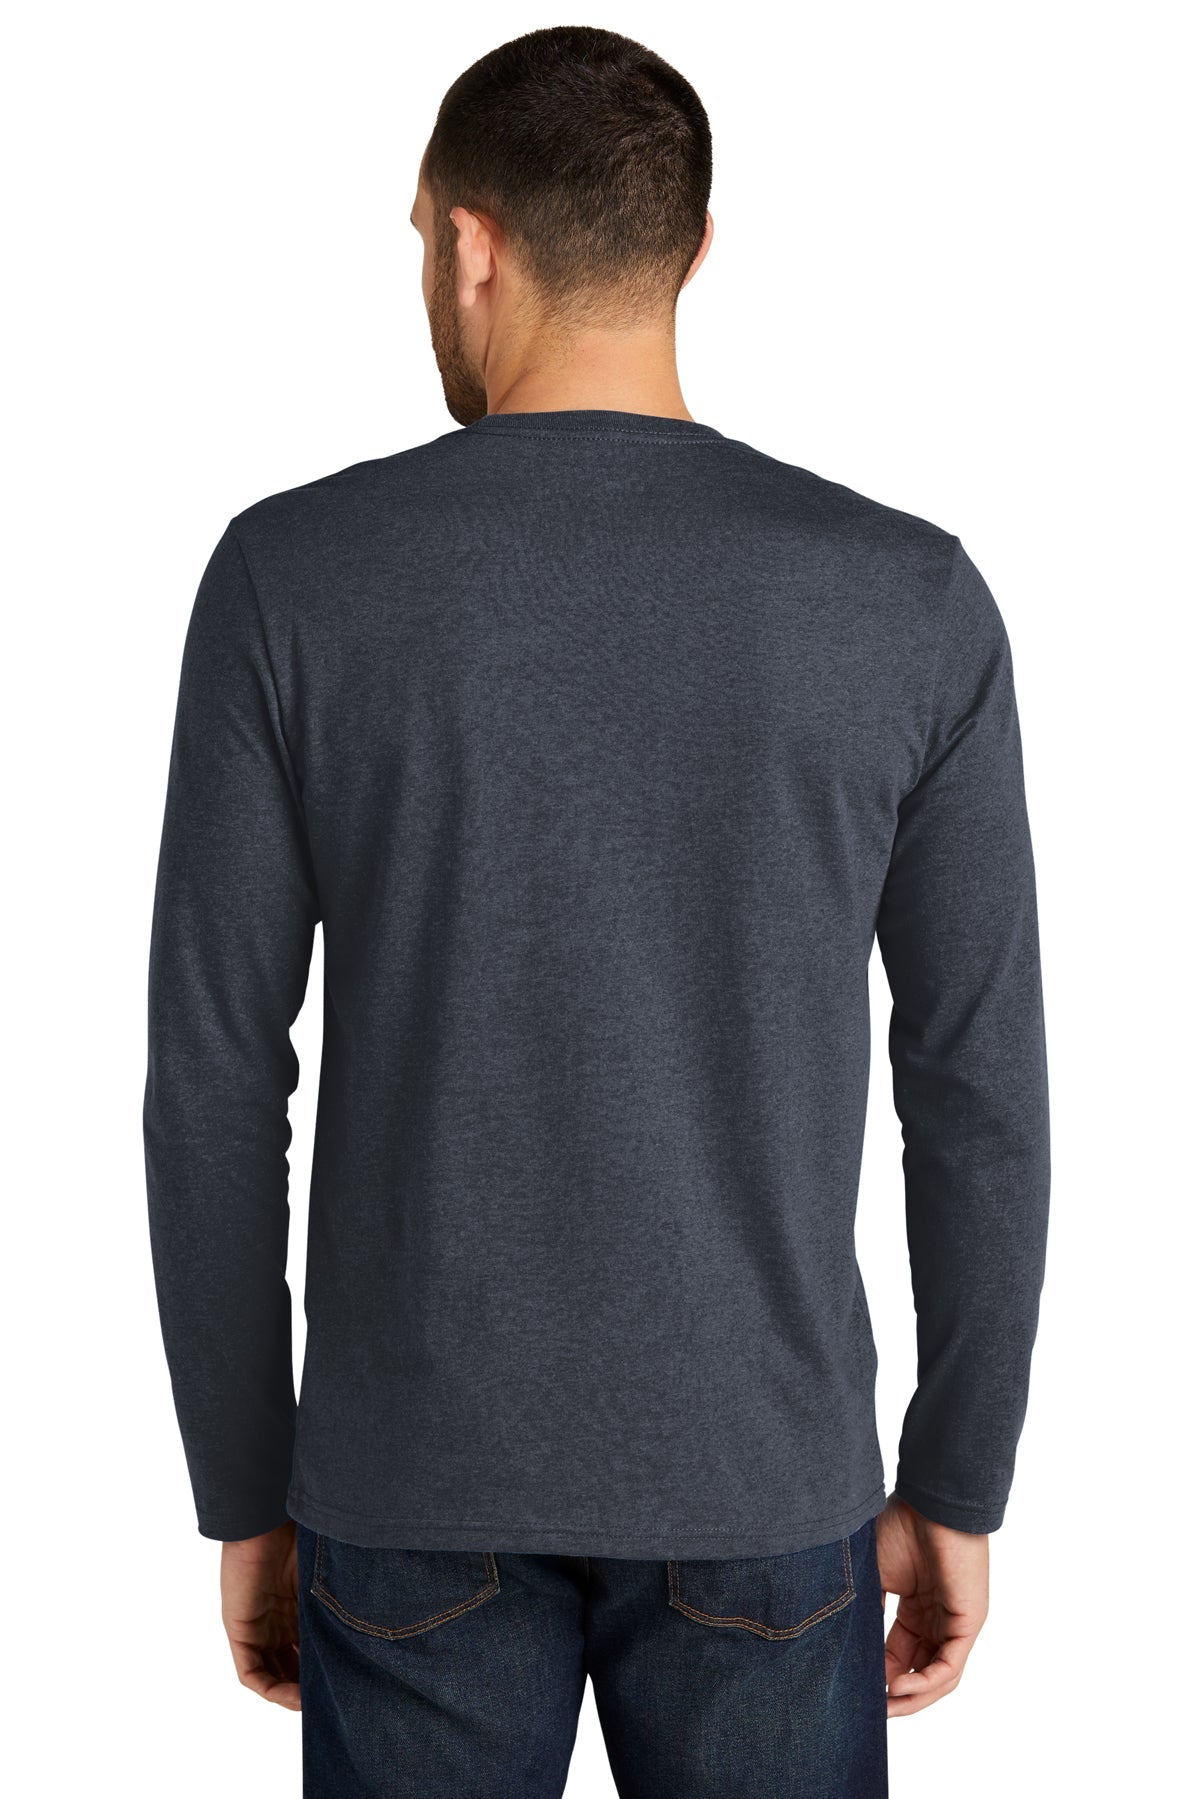 DT8003 District® Re-Tee® Long Sleeve